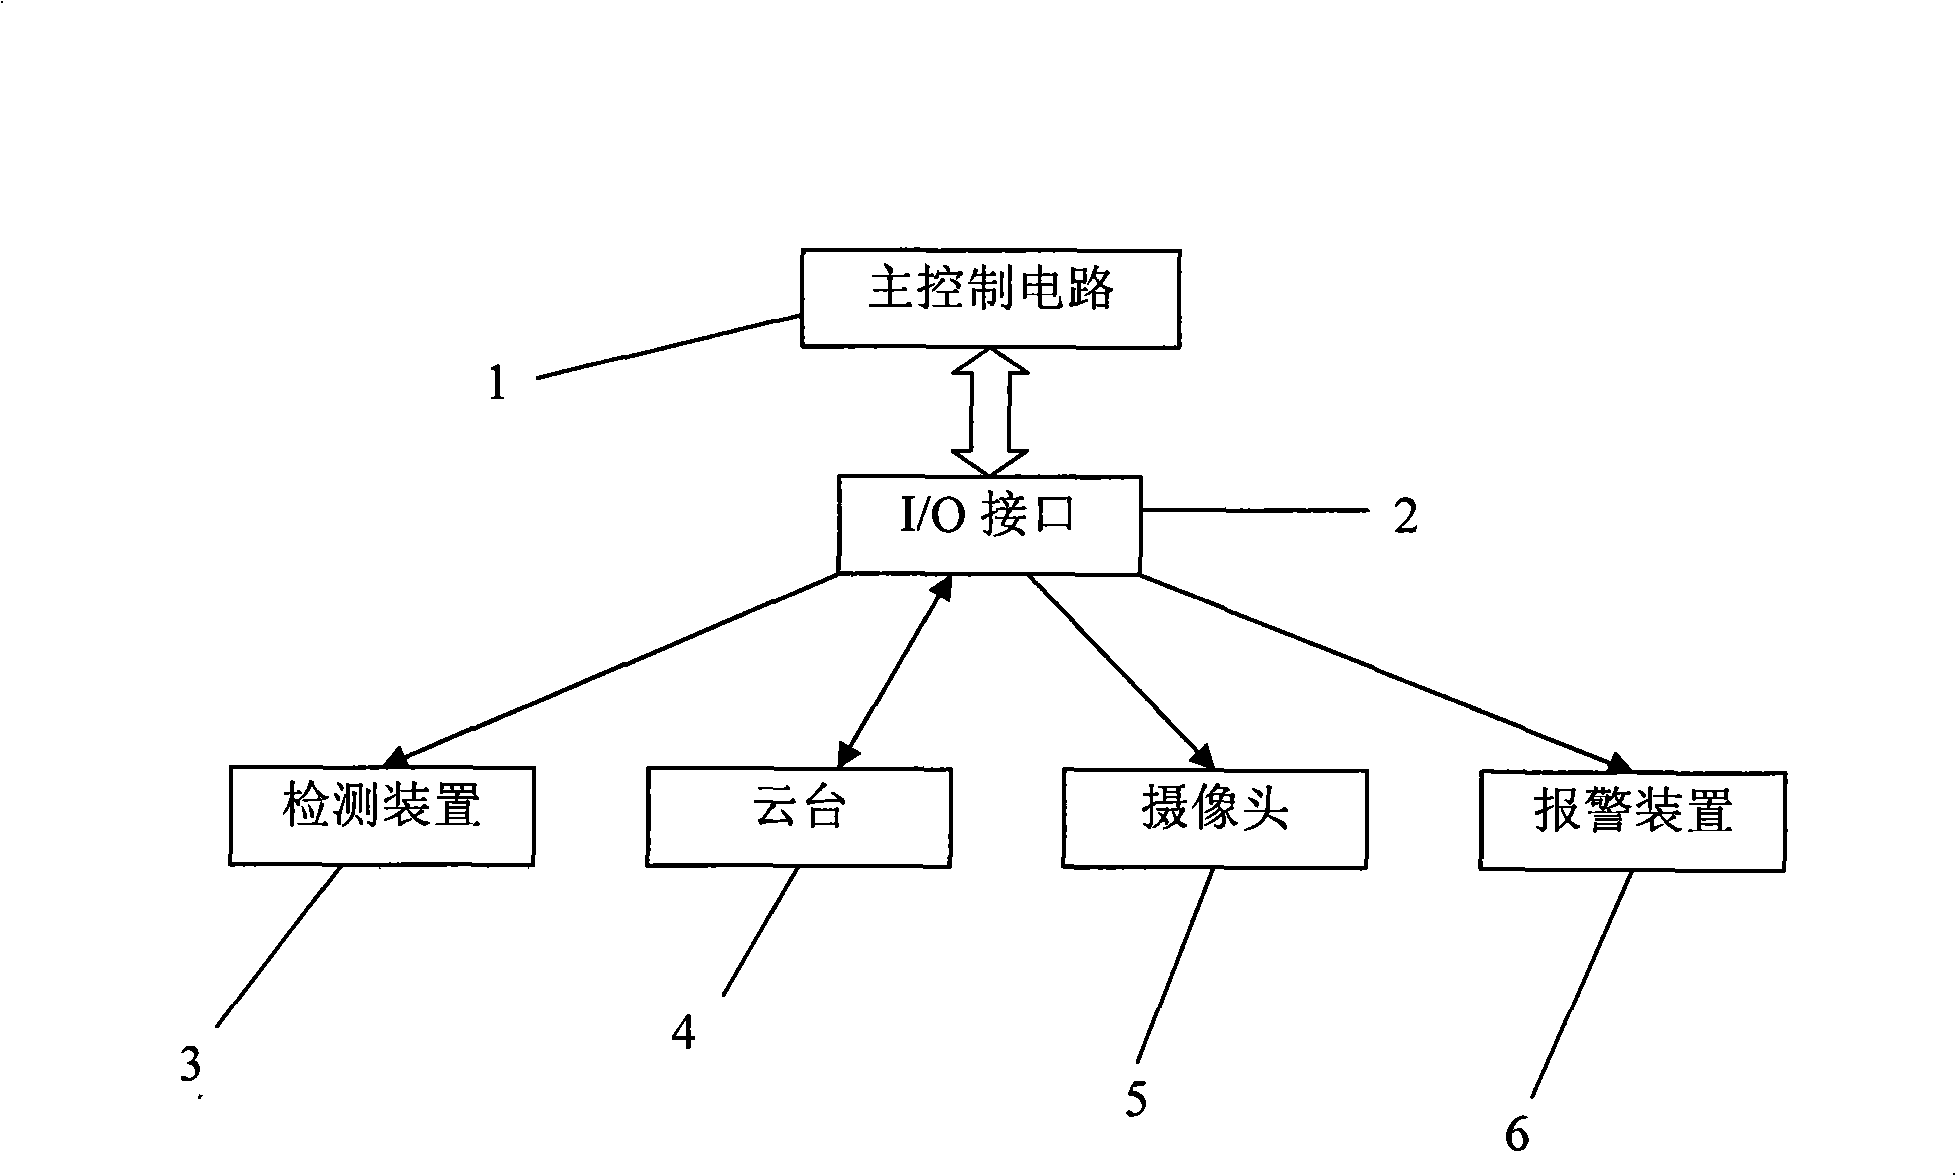 Multi-point triggering fixed point tracking monitoring method and system